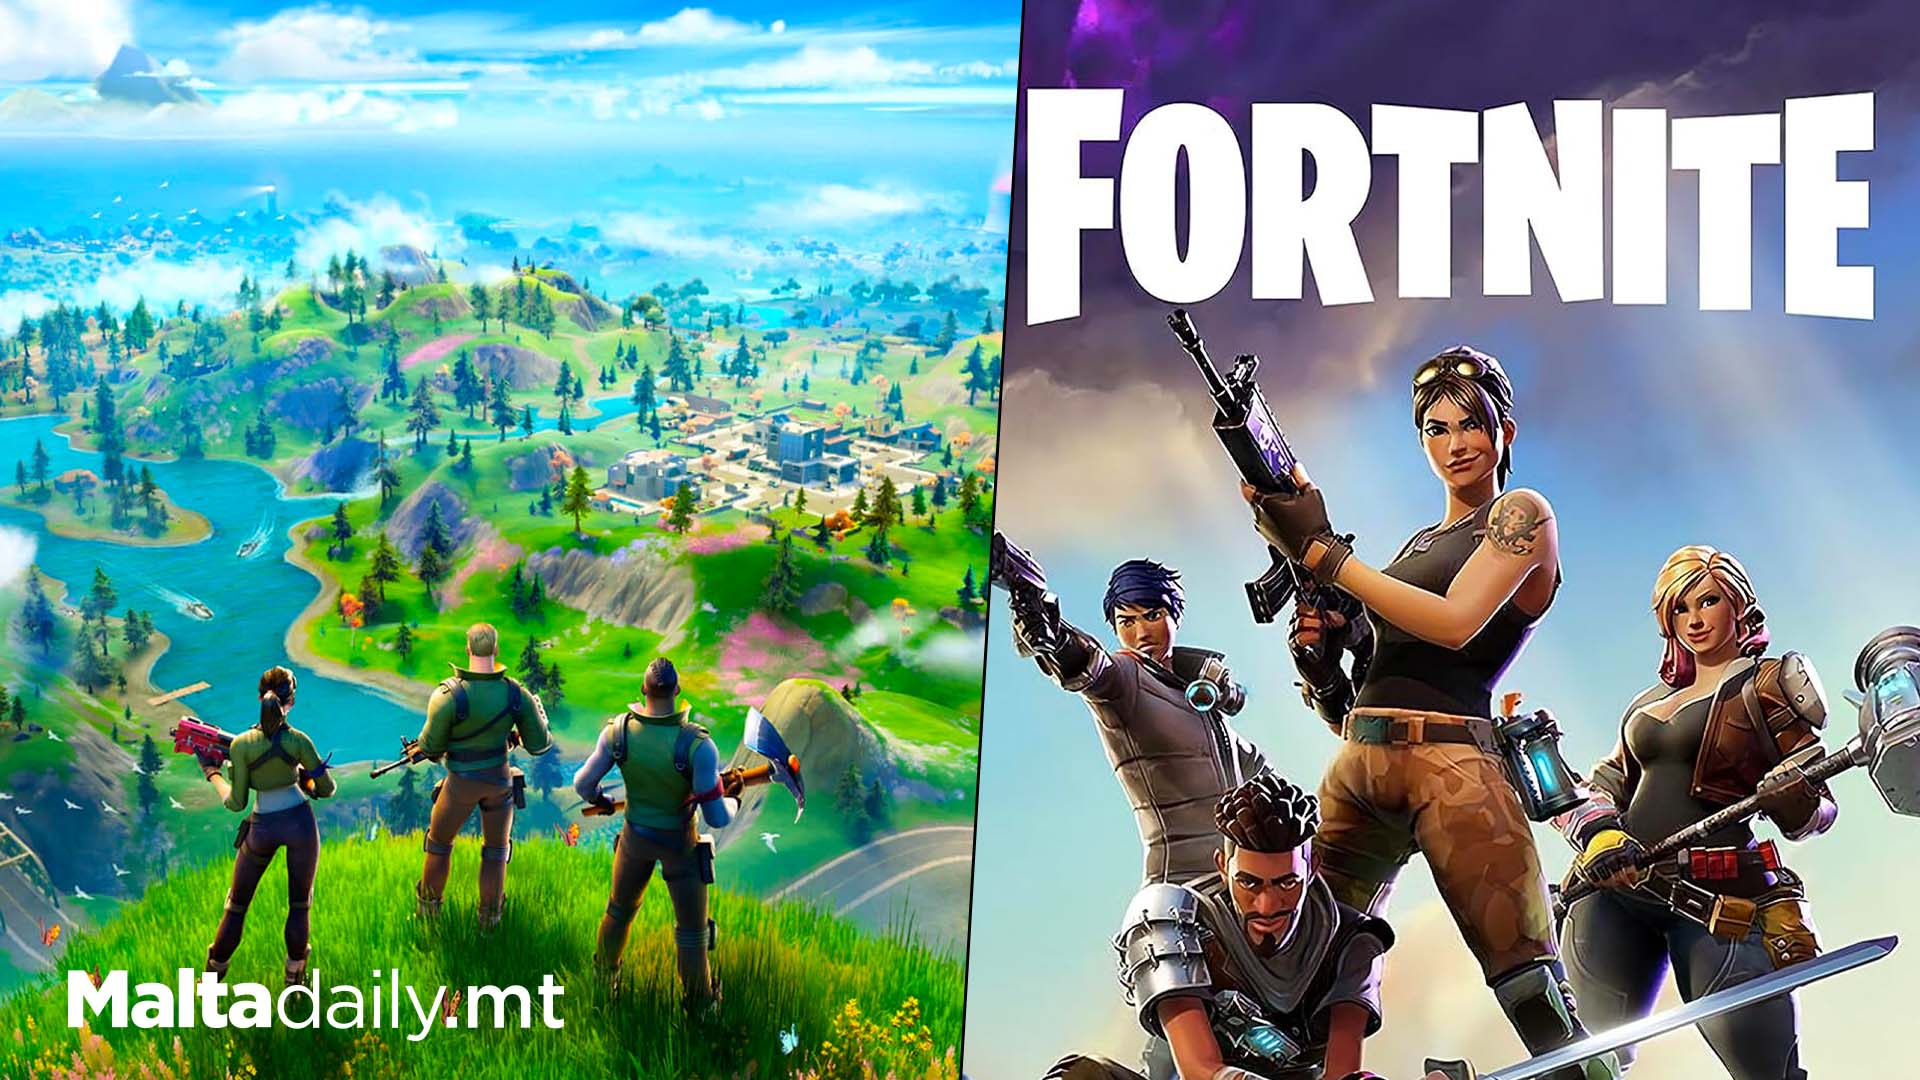 6.1 Million Fortnite Players In 1 Weekend For Original Map